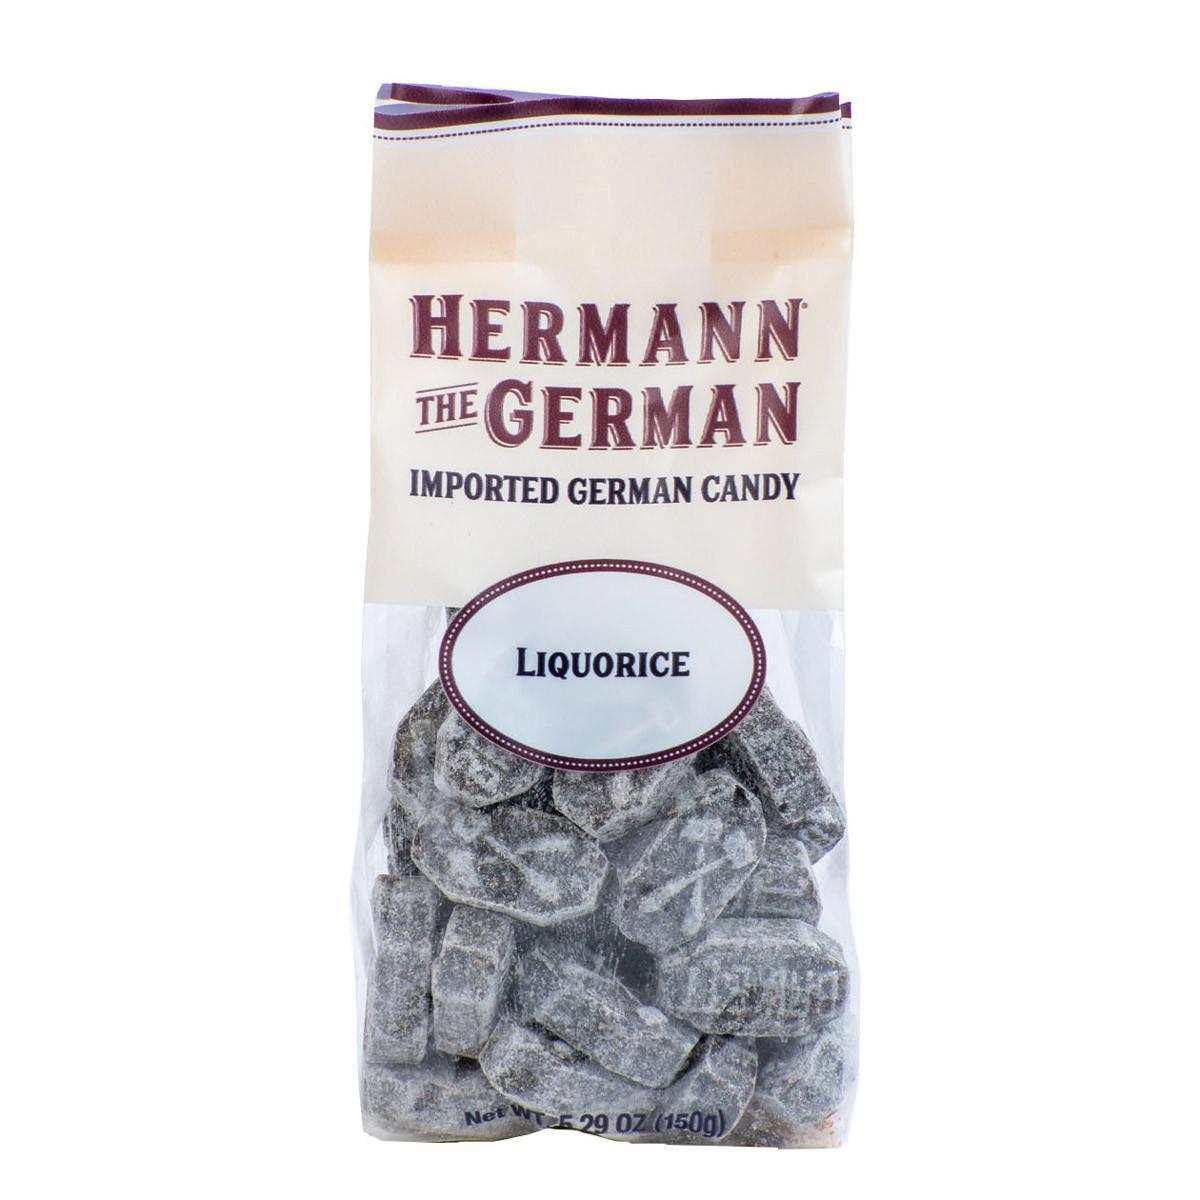 Hermann the German Licorice Candy